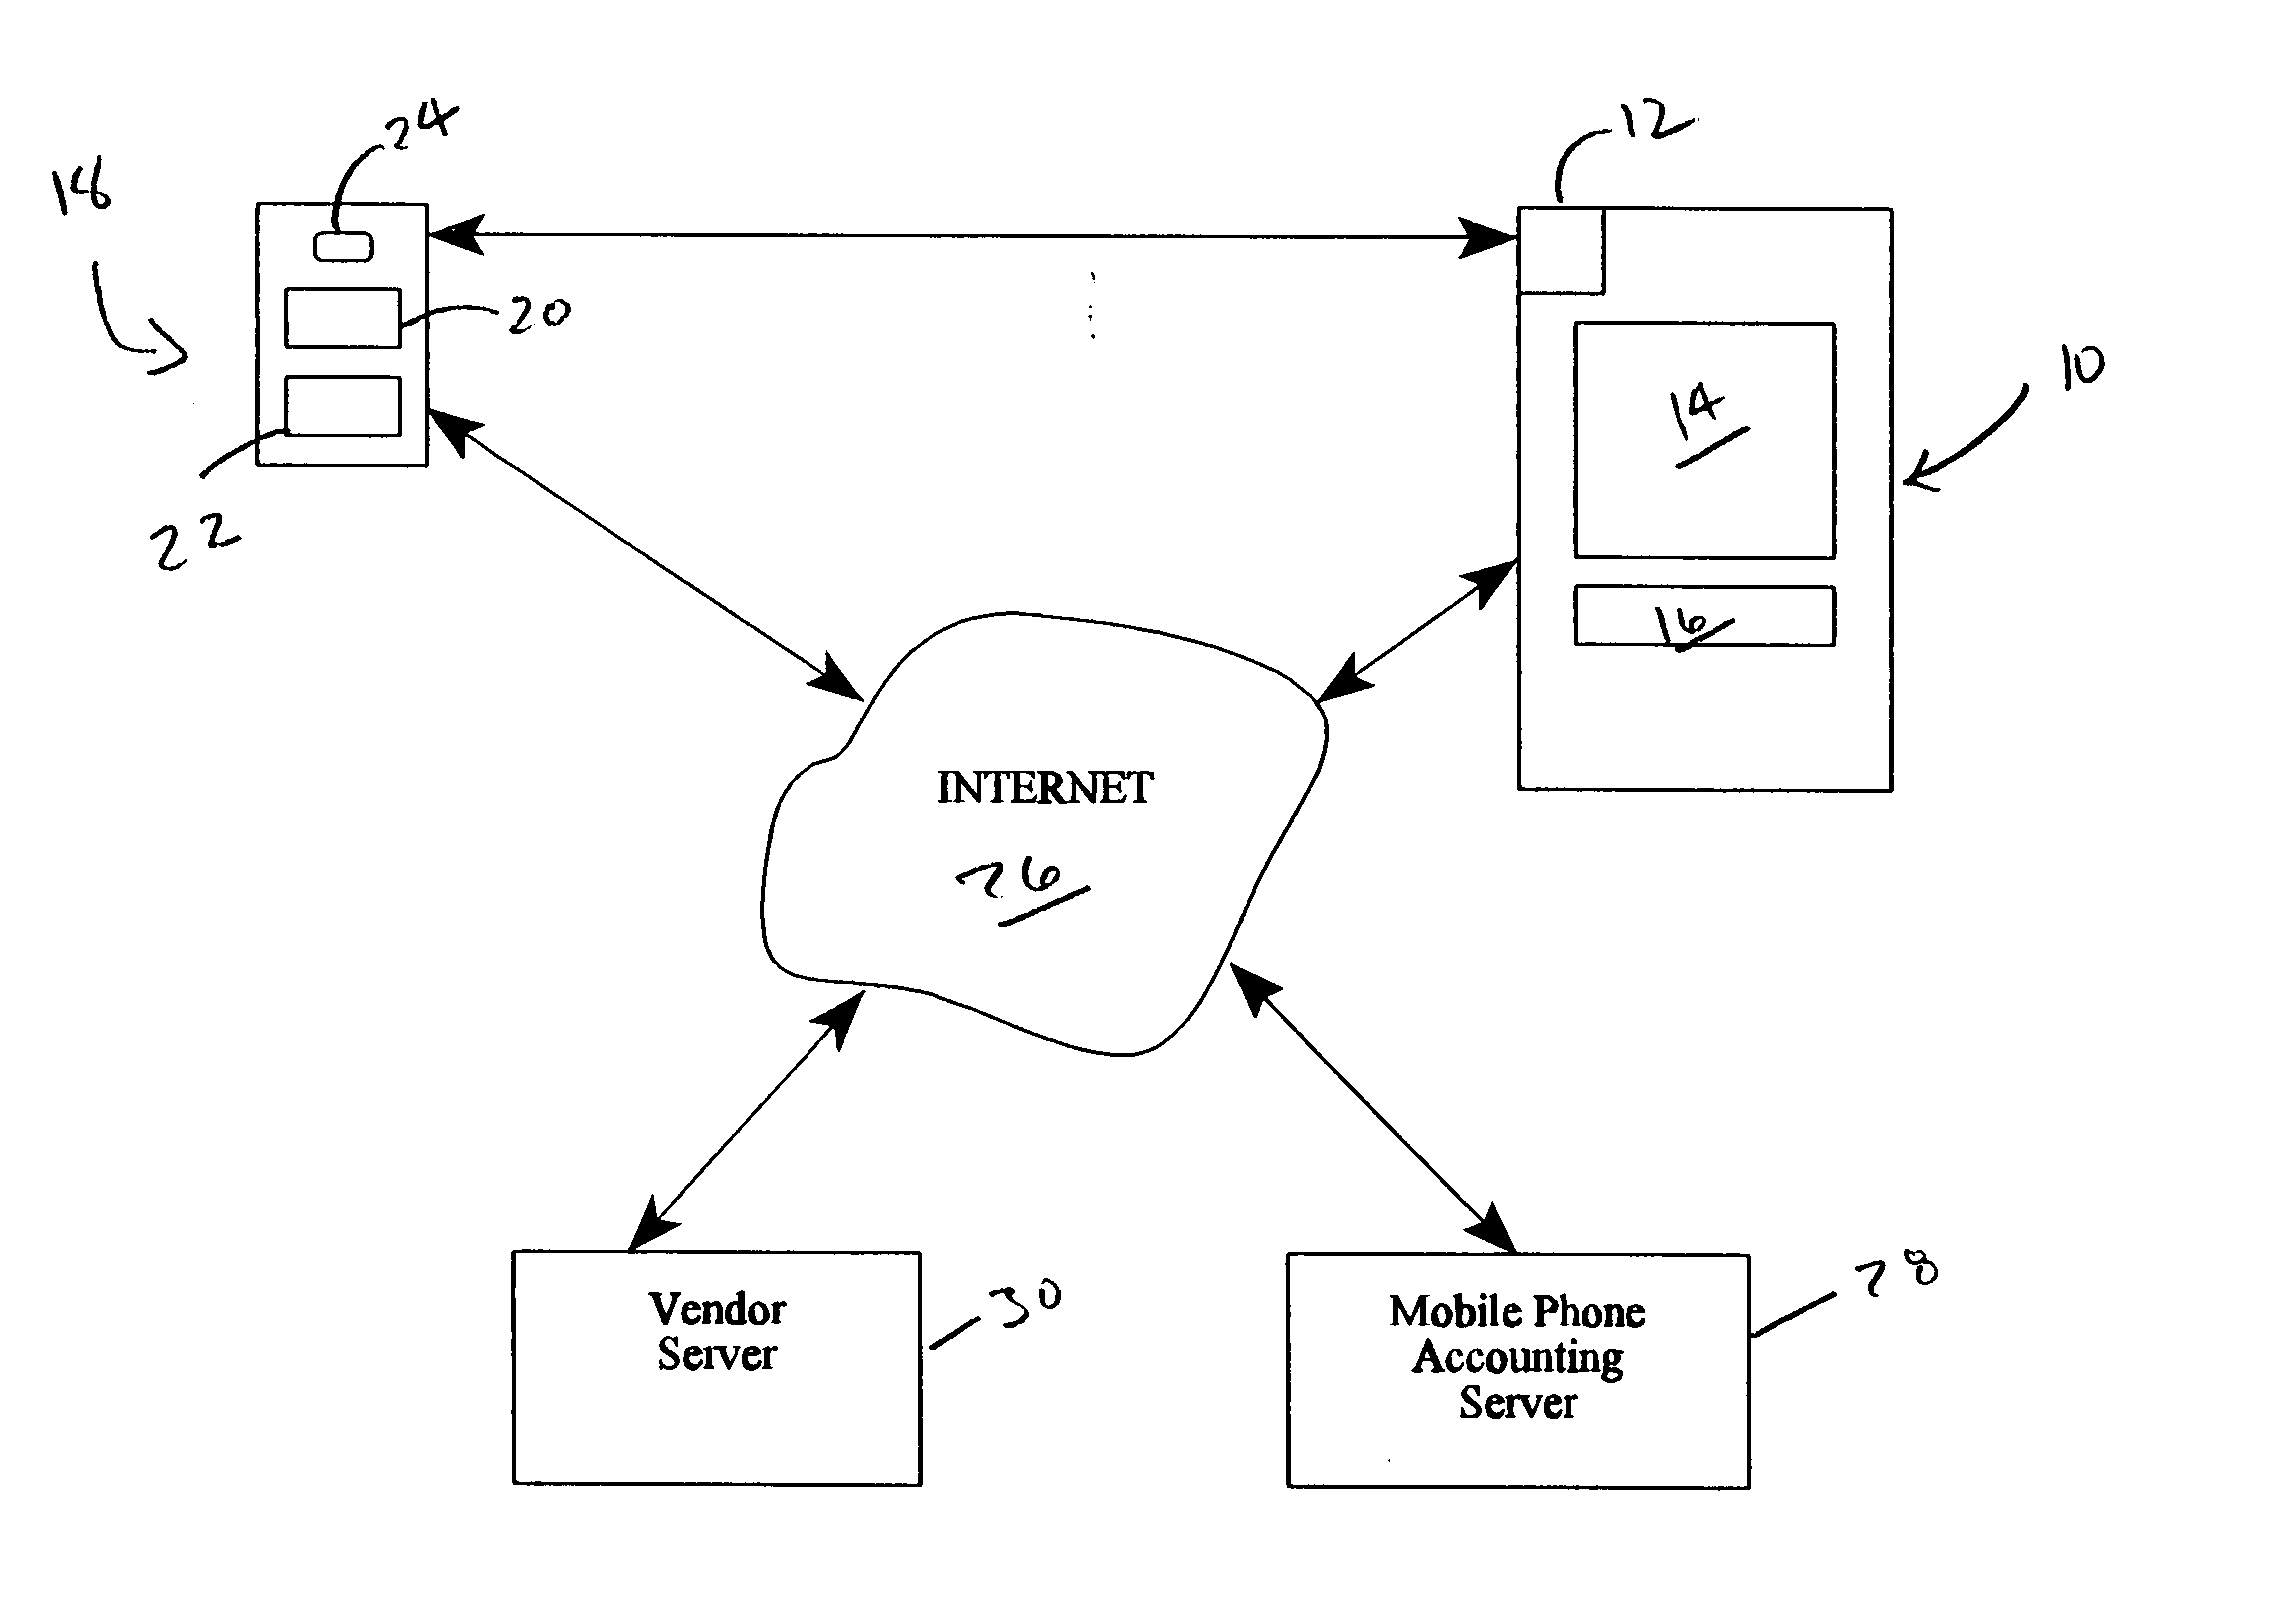 Associating mobile phone to vending machine via bar-code encoded data, CCD camera and internet connection